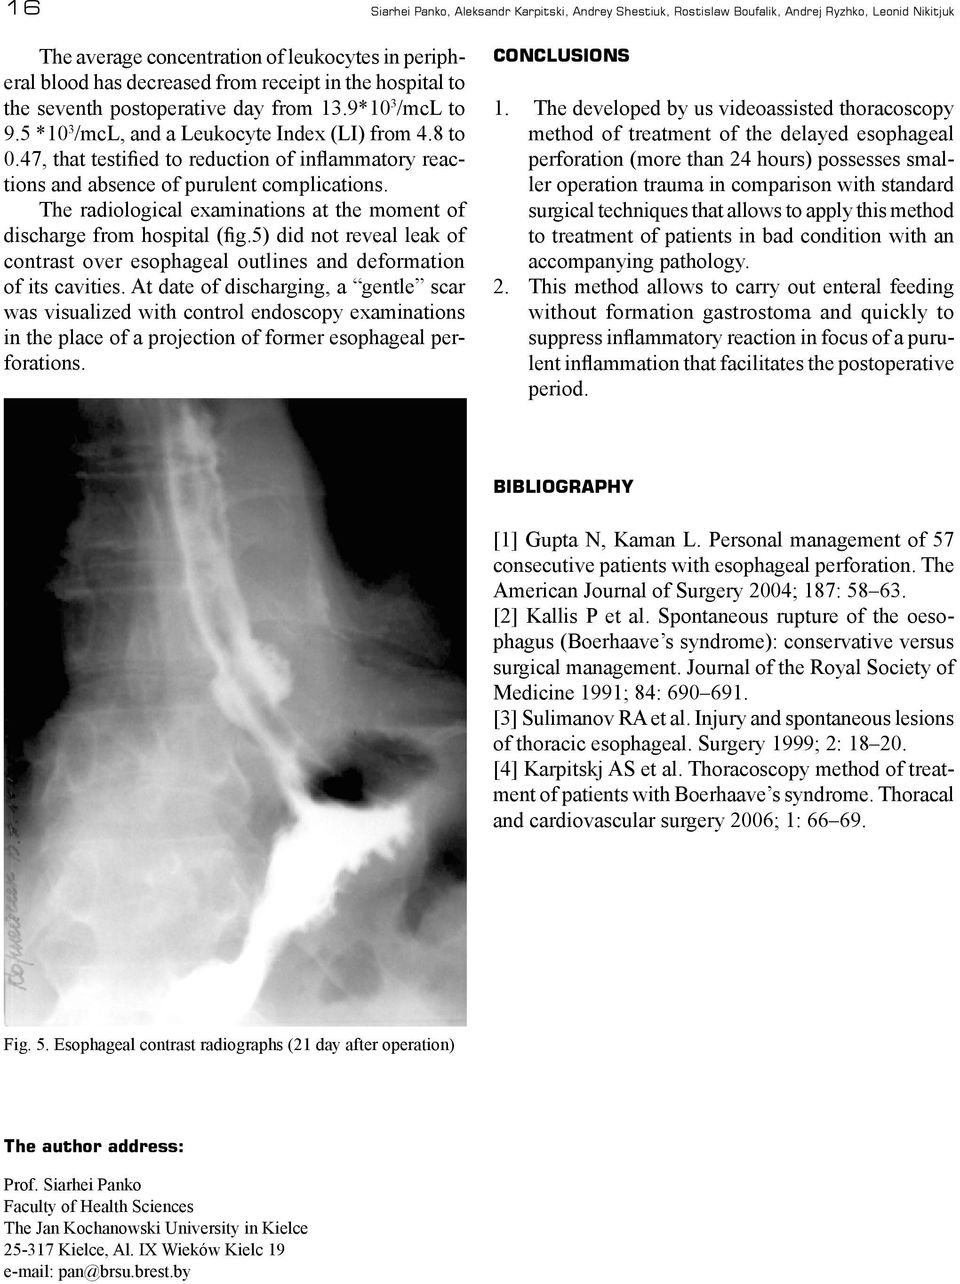 47, that testified to reduction of inflammatory reactions and absence of purulent complications. The radiological examinations at the moment of discharge from hospital (fig.